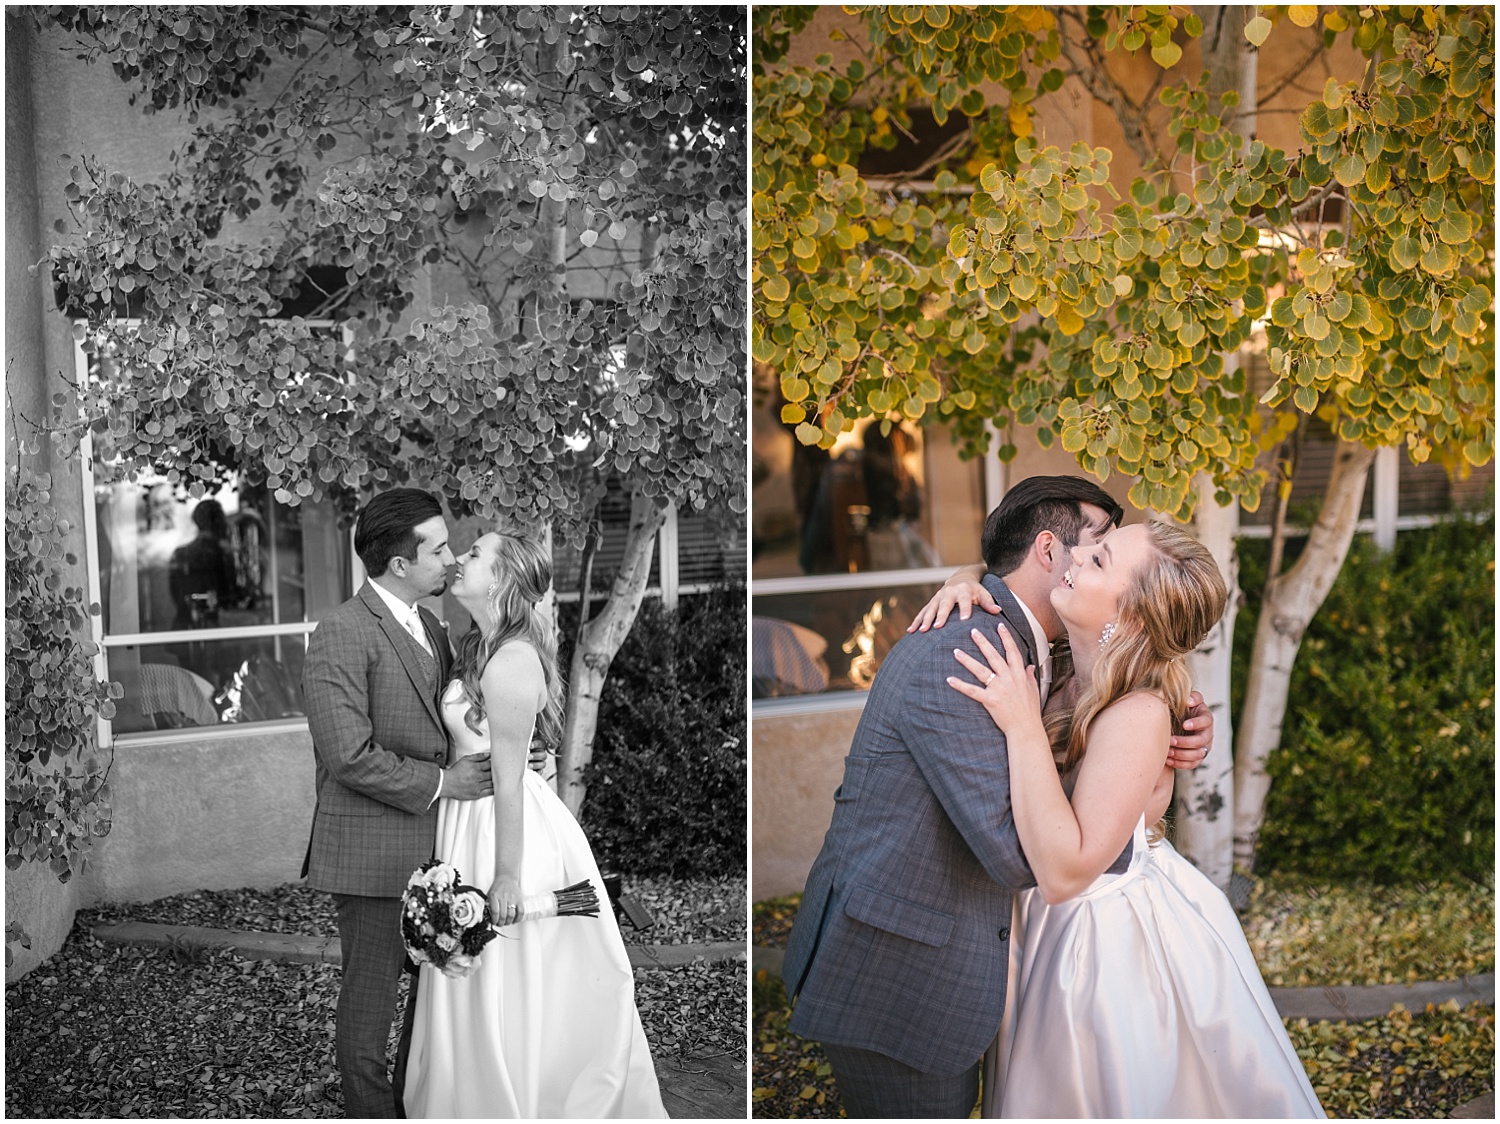 Bride and groom kissing and laughing under the aspen trees for fall backyard wedding in NE Albuquerque Acres